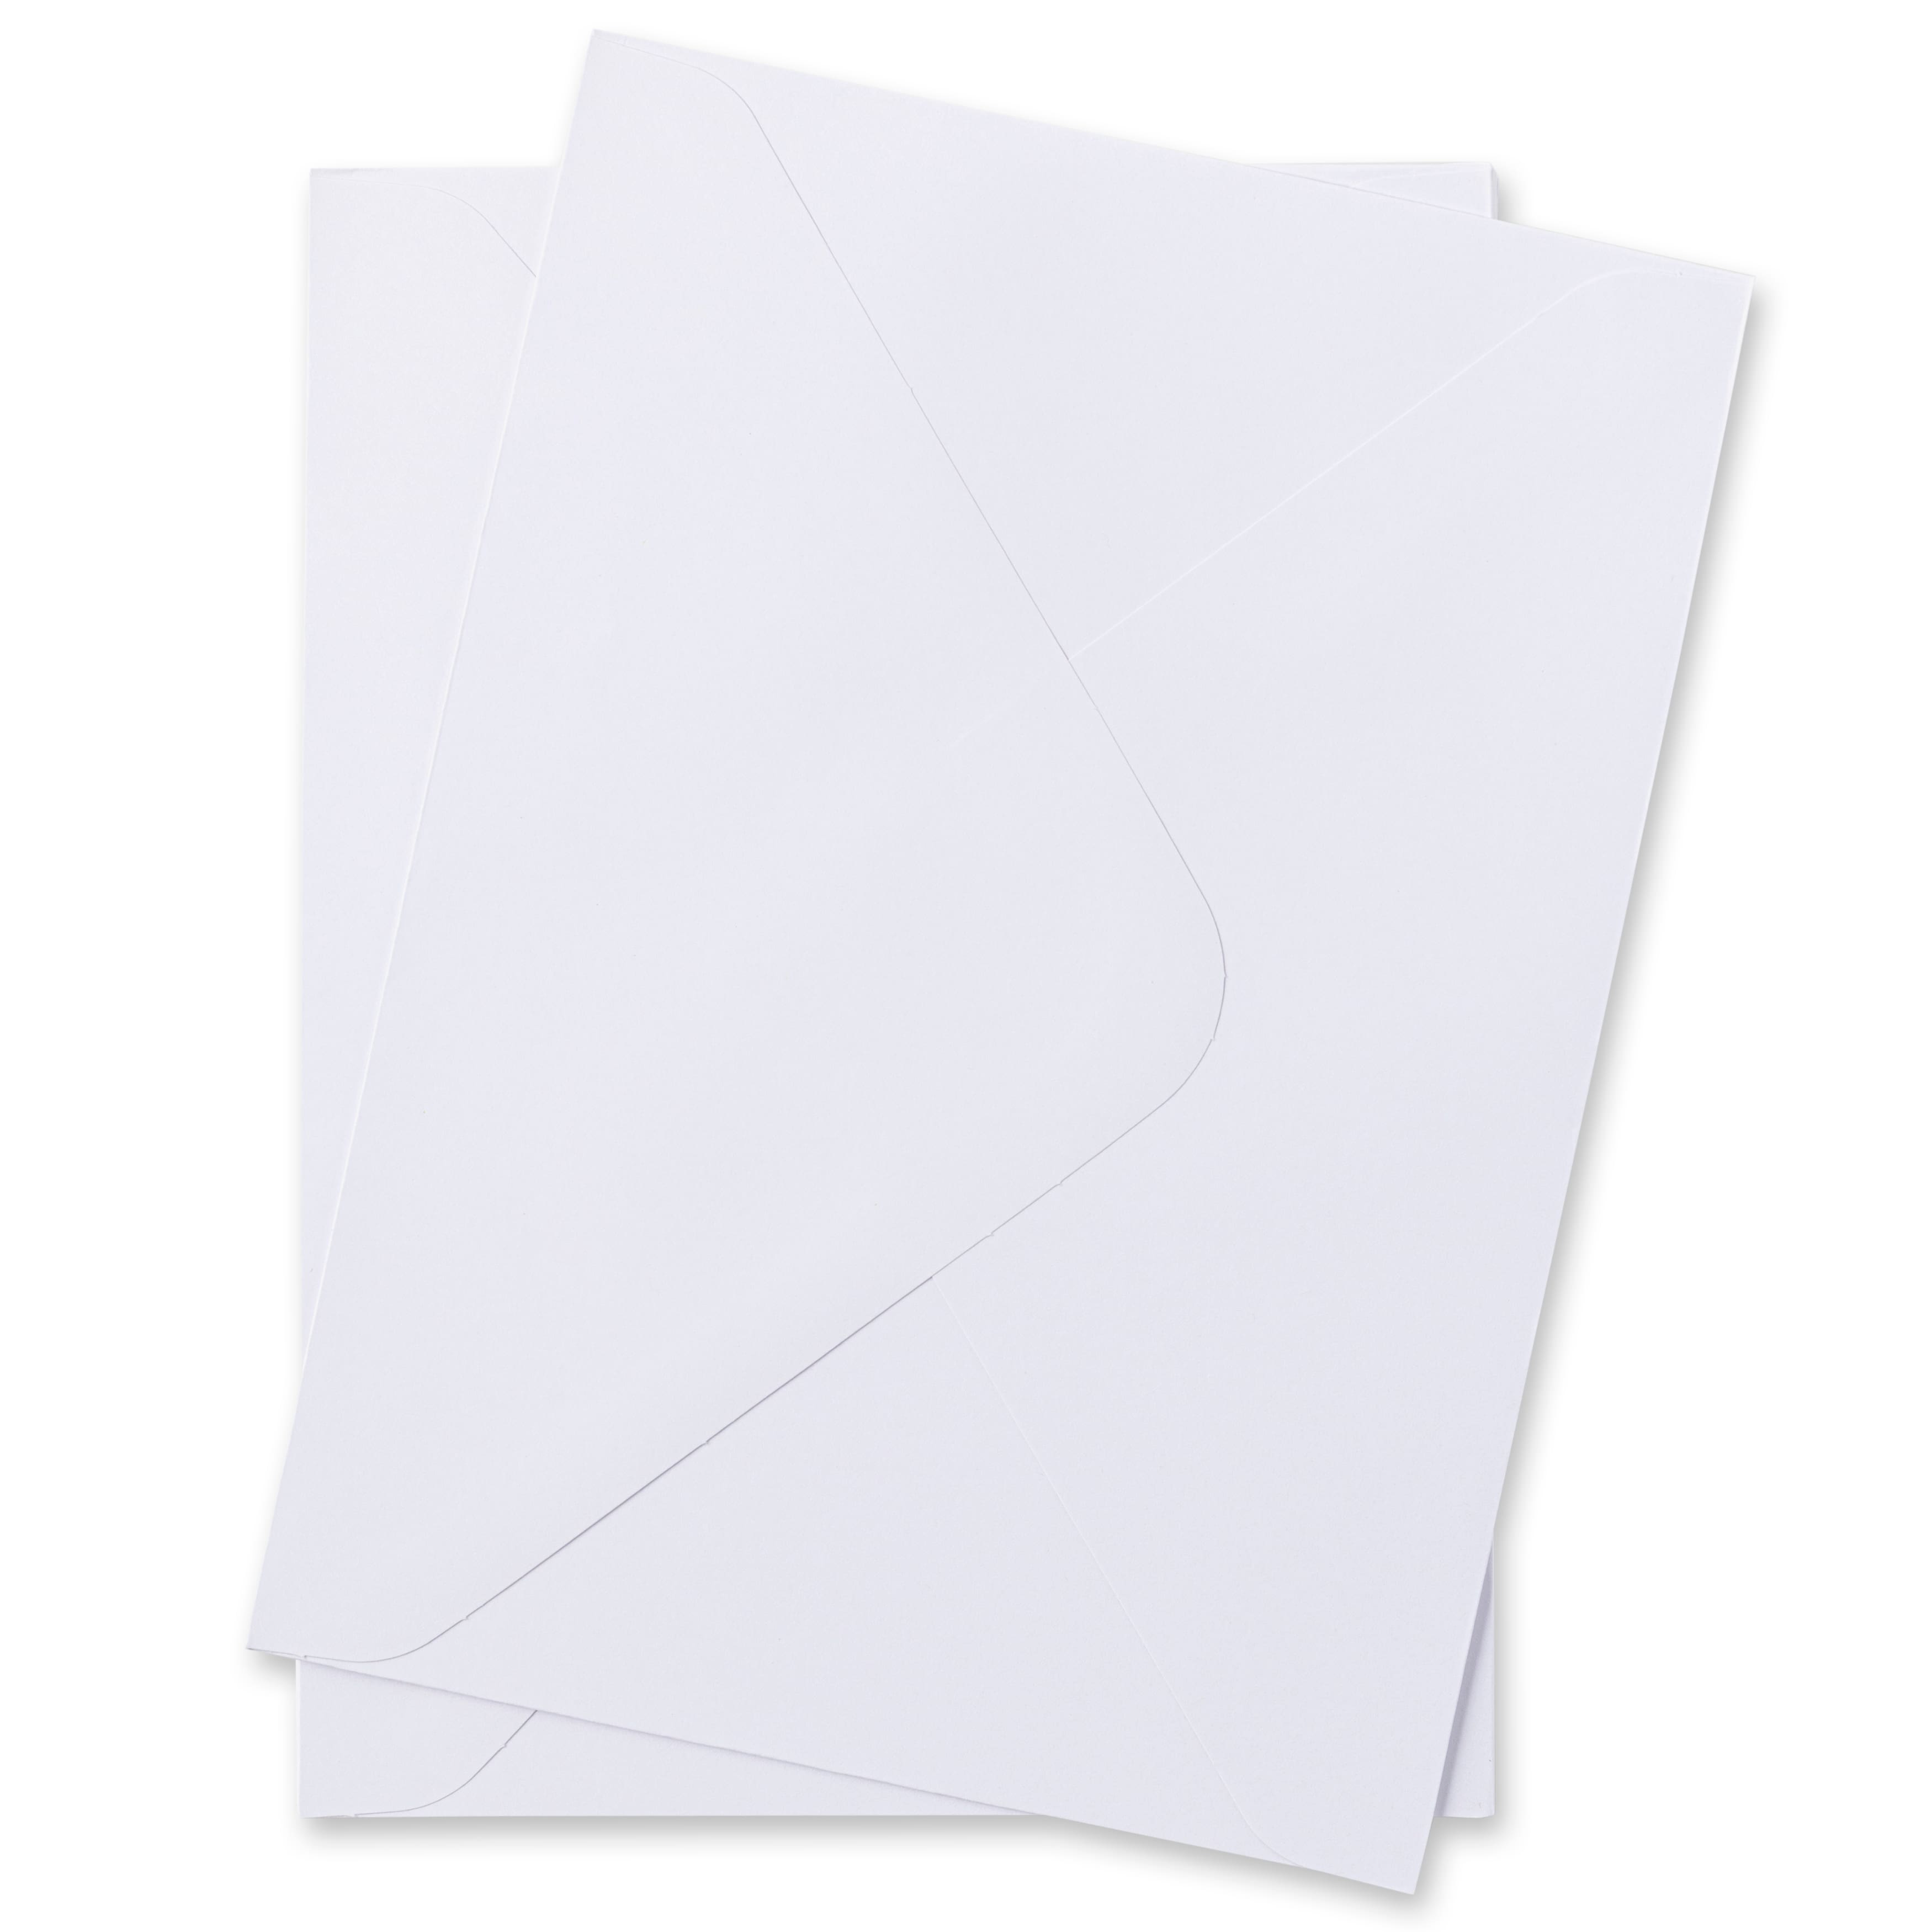 32lb/80lb Text Baby Showers Square Flap 120 GSM Graduations Peel 5 ¼ x 7 ¼ inches Press & Self Seal for 5x7 Cards - Perfect for Weddings 55 5x7 White Invitation Envelopes A7 - 